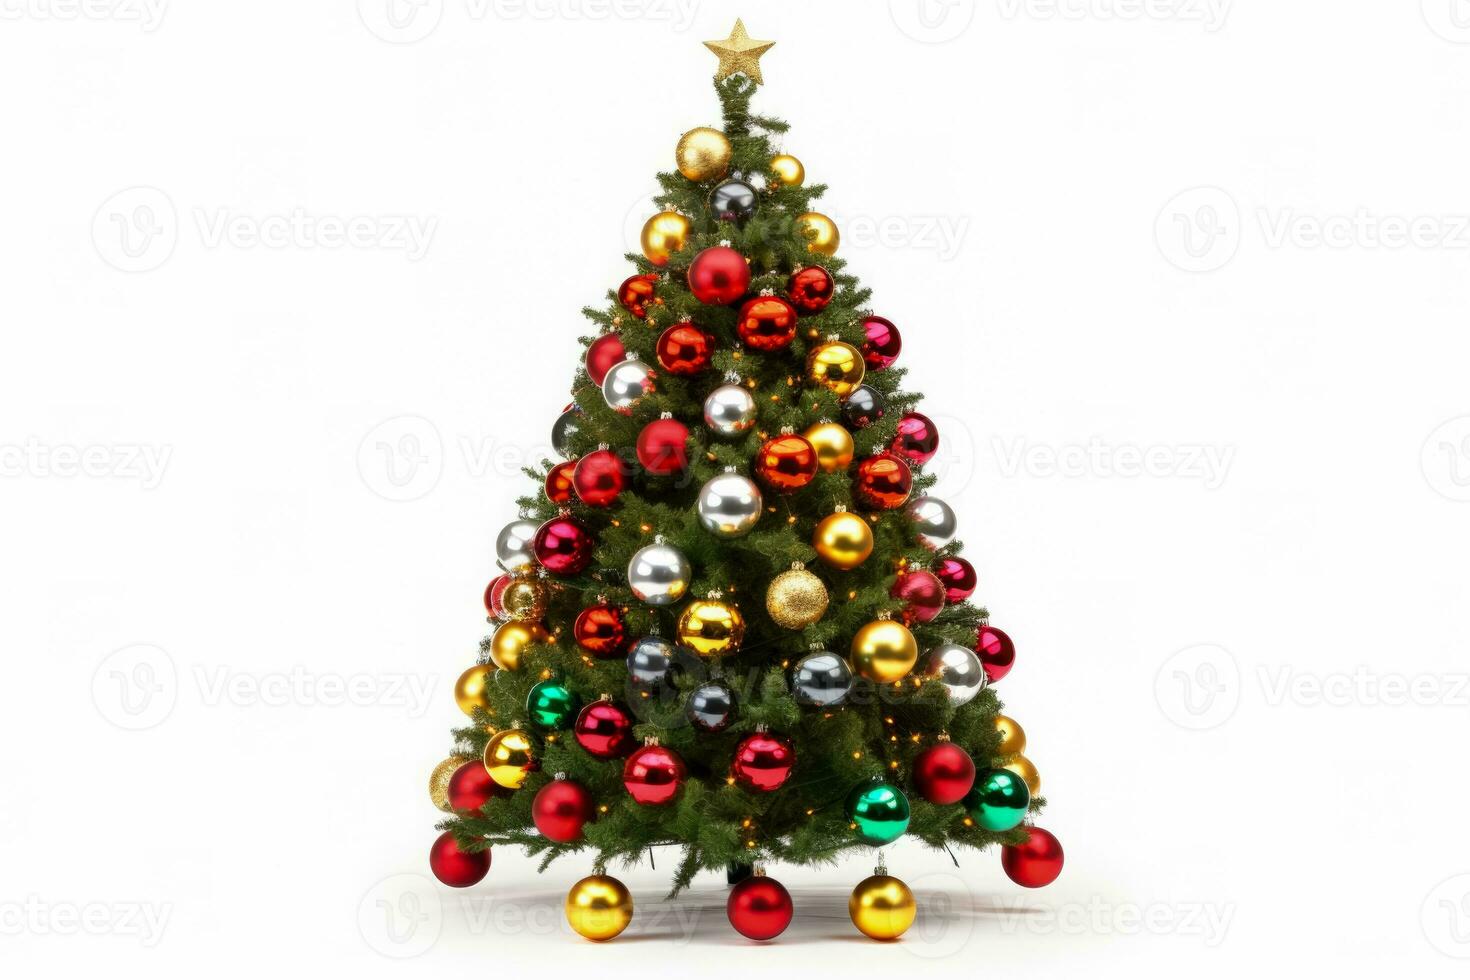 Christmas tree adorned with festive ornaments and lights isolated on a white background photo